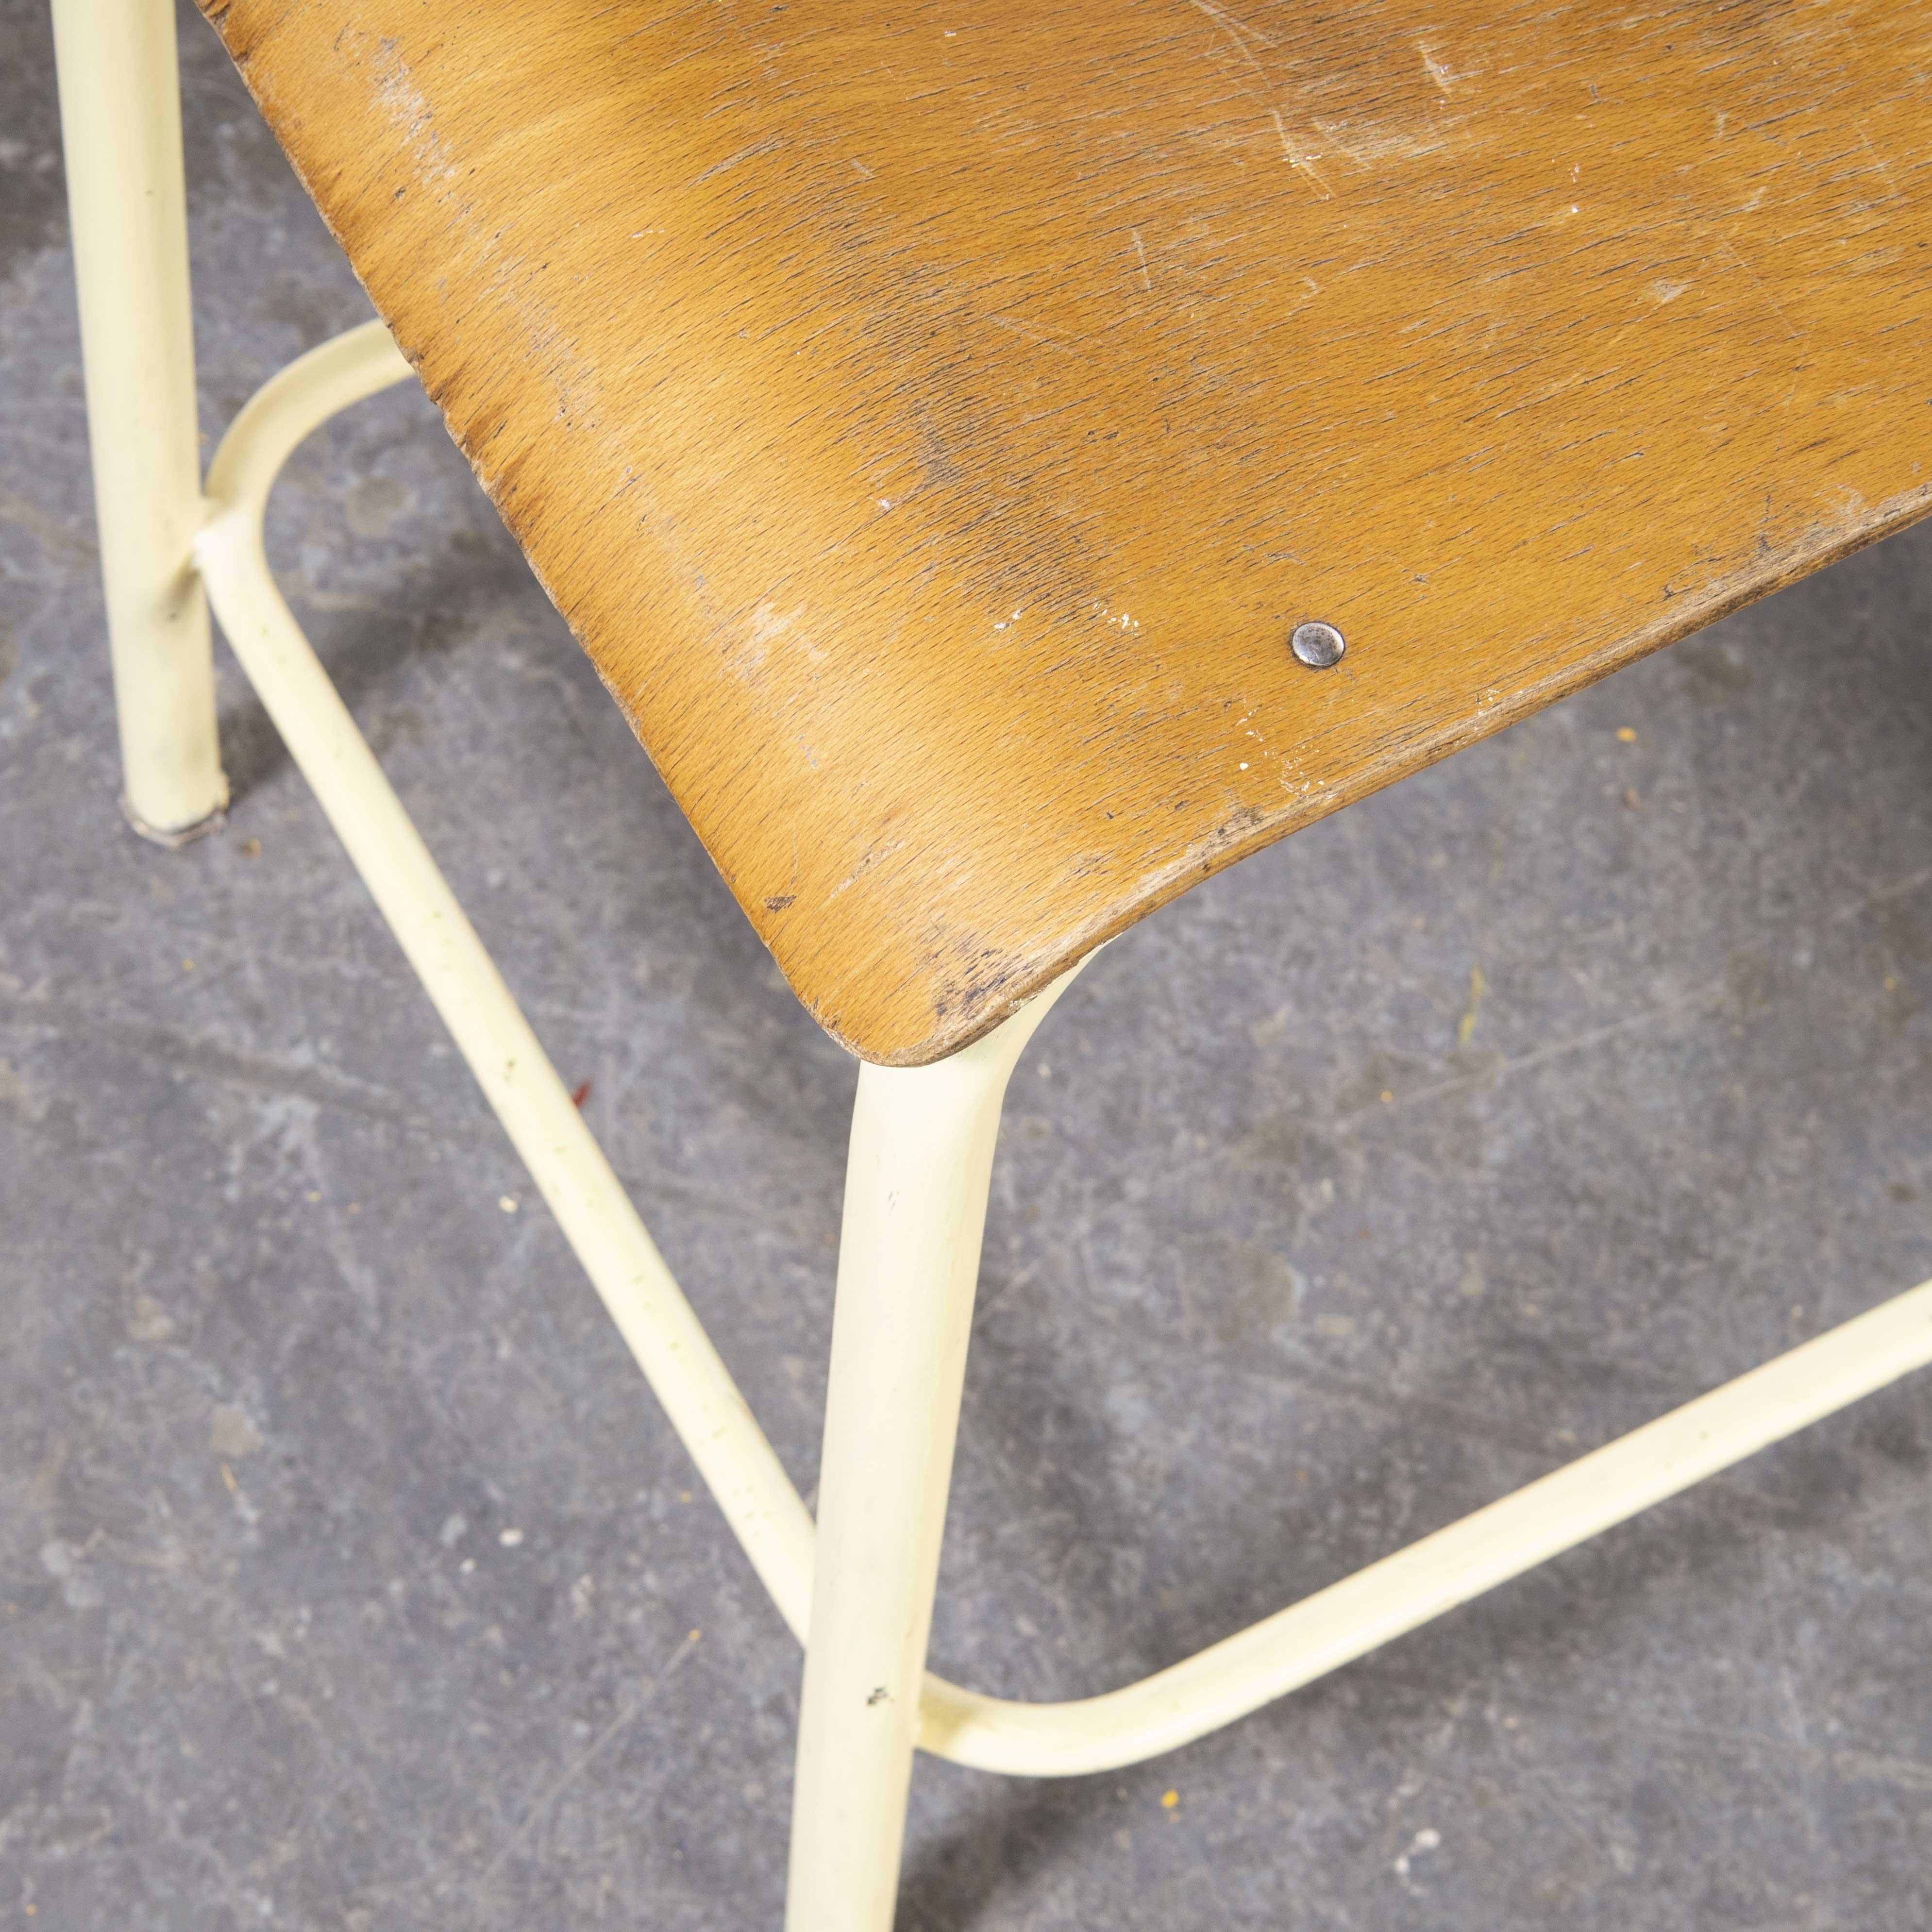 1970’s Mullca High Laboratory yellow dining chairs – Bar stools – Set of six
1950’s Mullca High Laboratory yellow dining chairs – Bar stools – Set of six. One of our most favourite chairs the higher seat (53 cm) laboratory high chairs made by